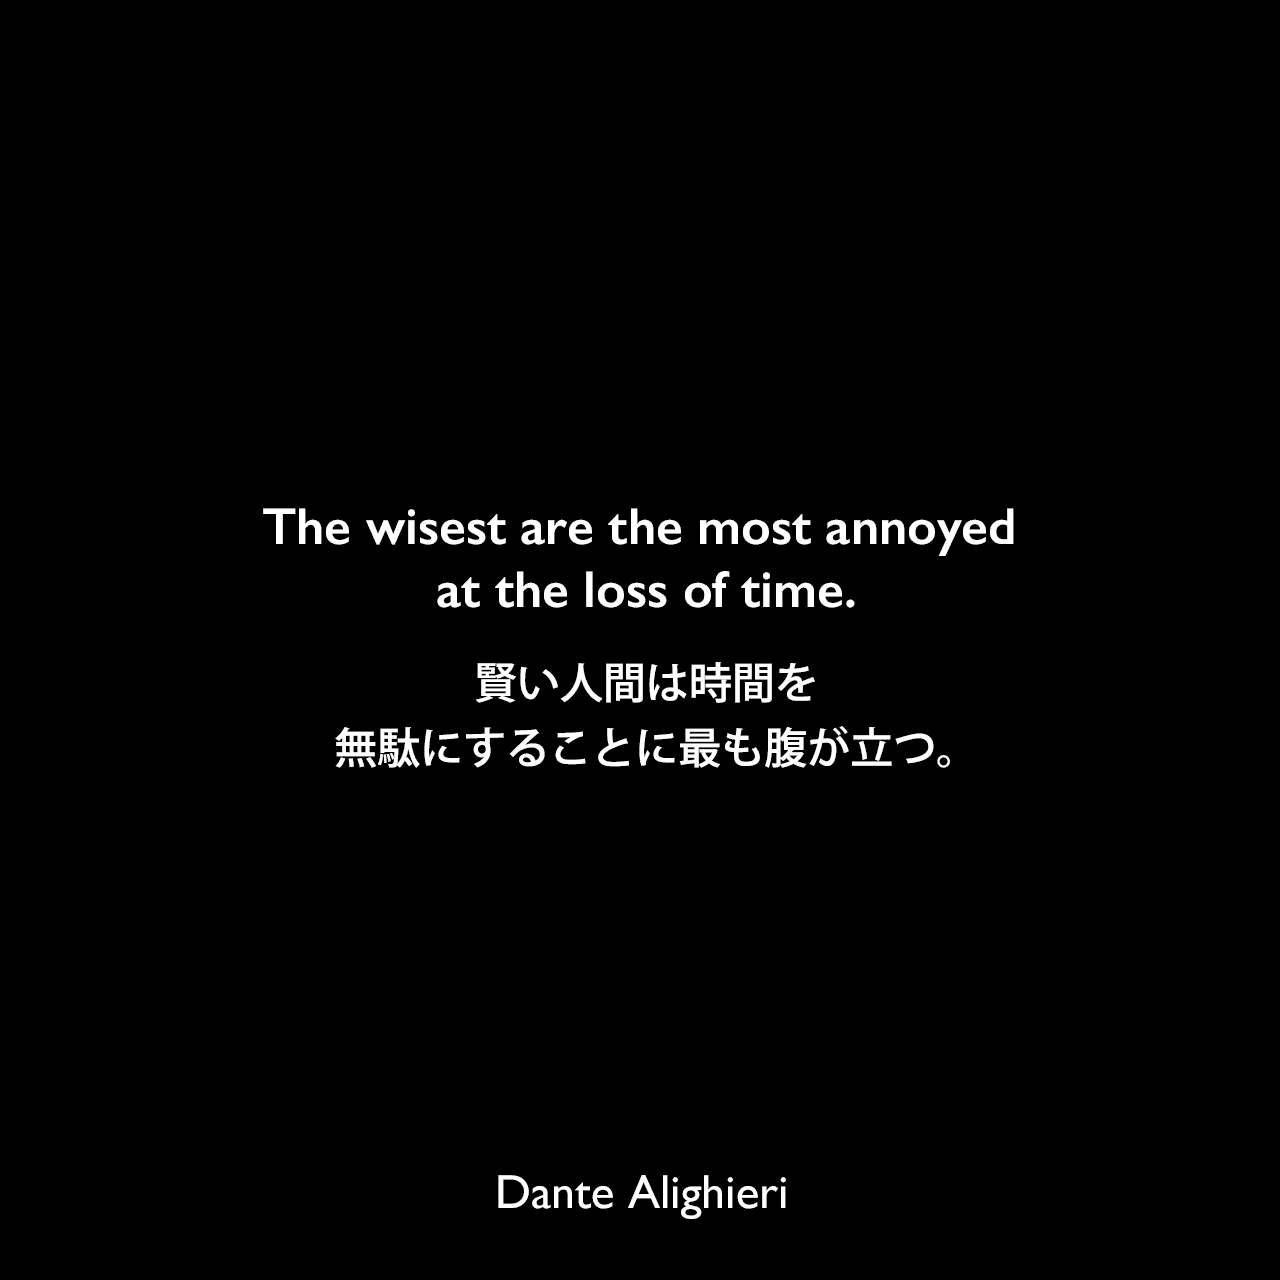 The wisest are the most annoyed at the loss of time.賢い人間は時間を無駄にすることに最も腹が立つ。Dante Alighieri